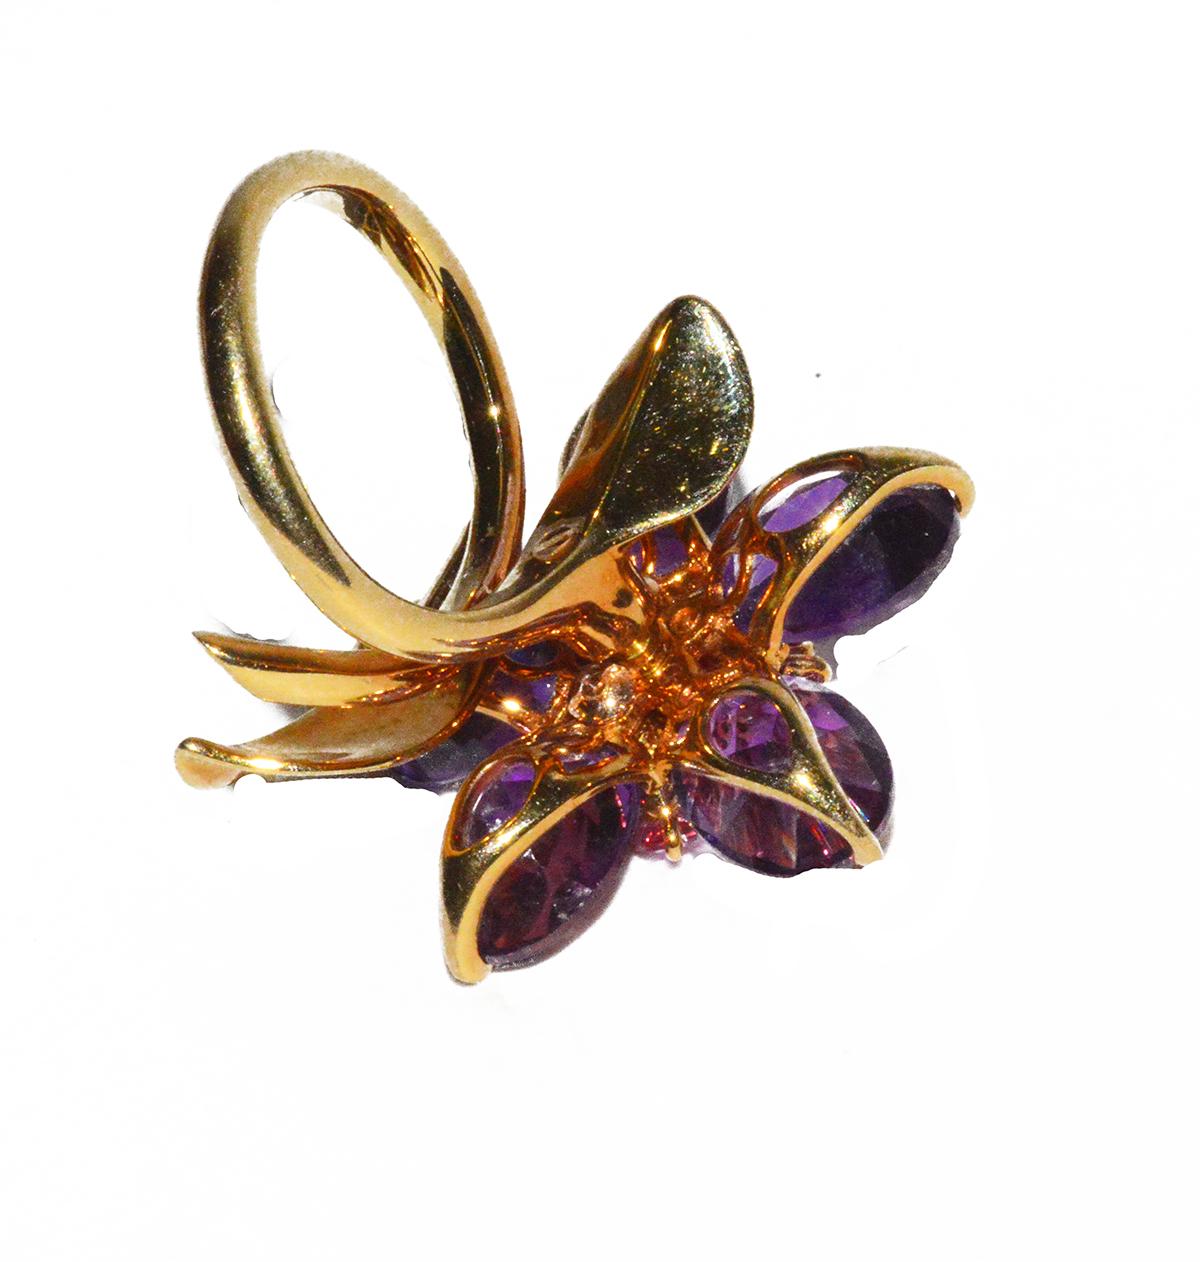 Women's Rare Moveable Van Cleef & Arpels Moveable Amethyst Flower Ring